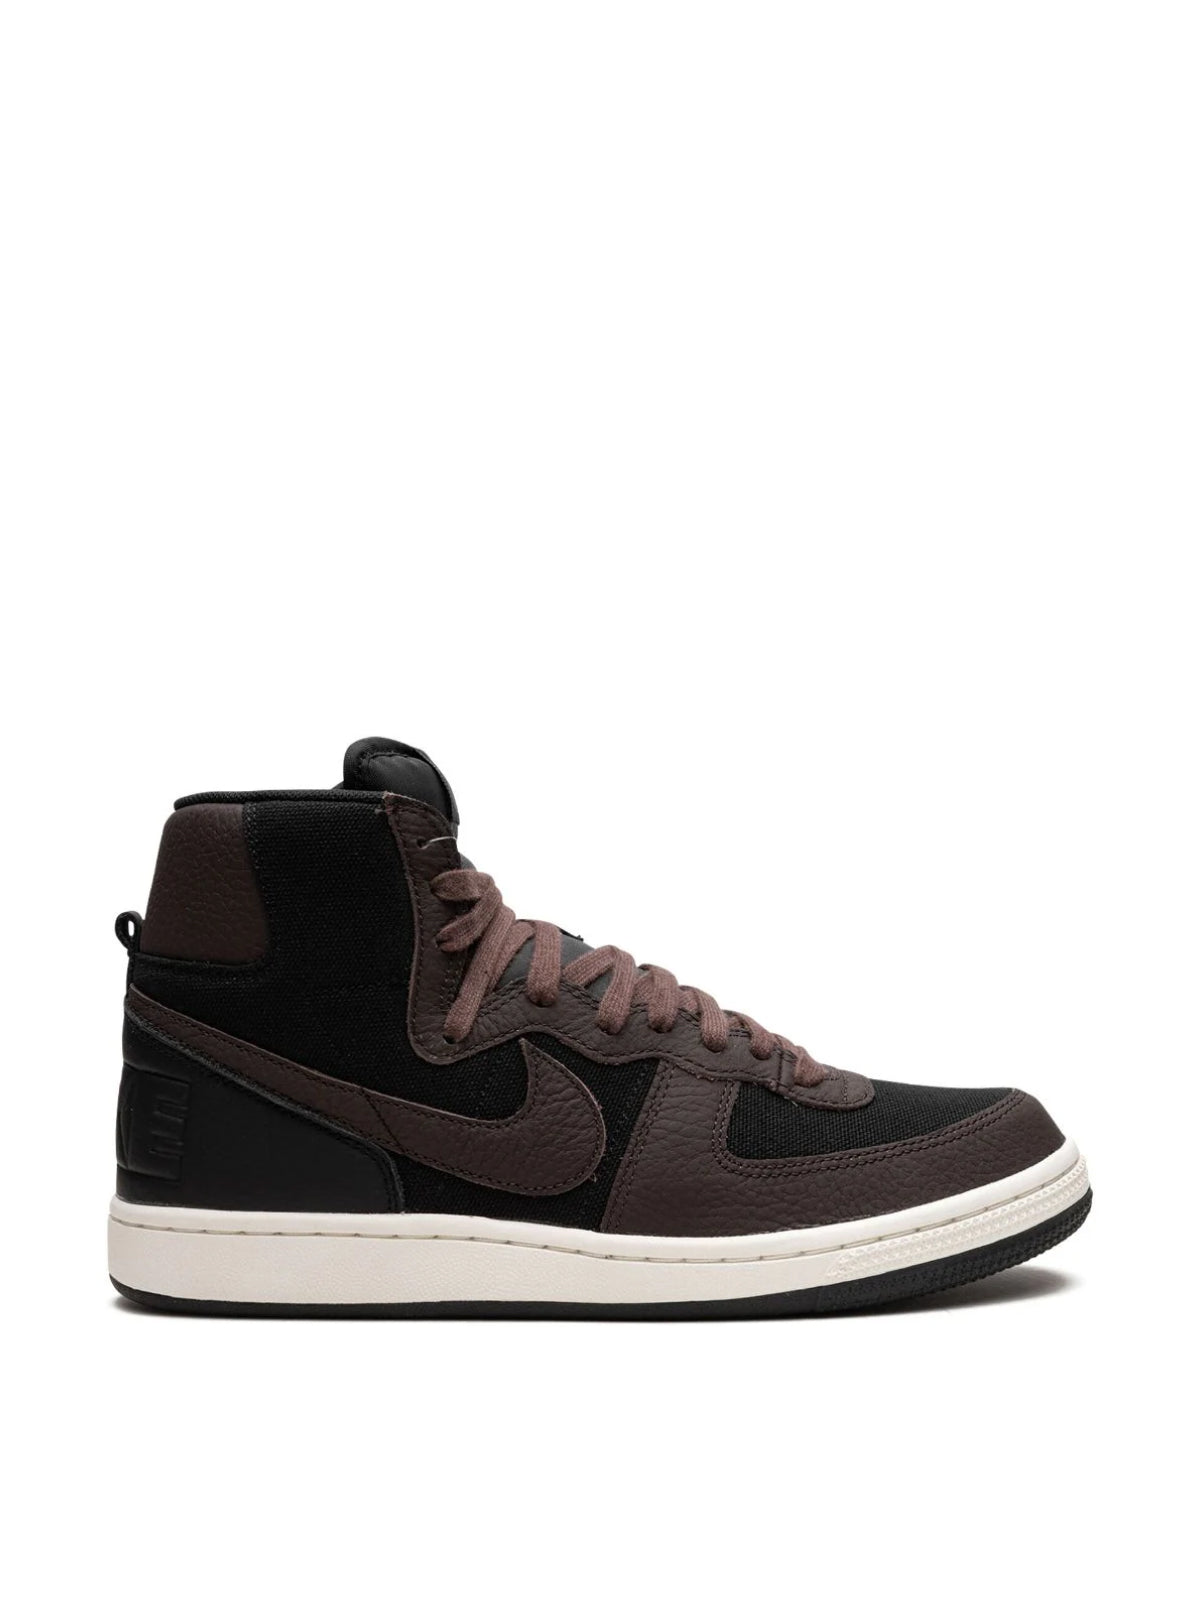 Nike-OUTLET-SALE-Terminator High SE Sneakers-ARCHIVIST